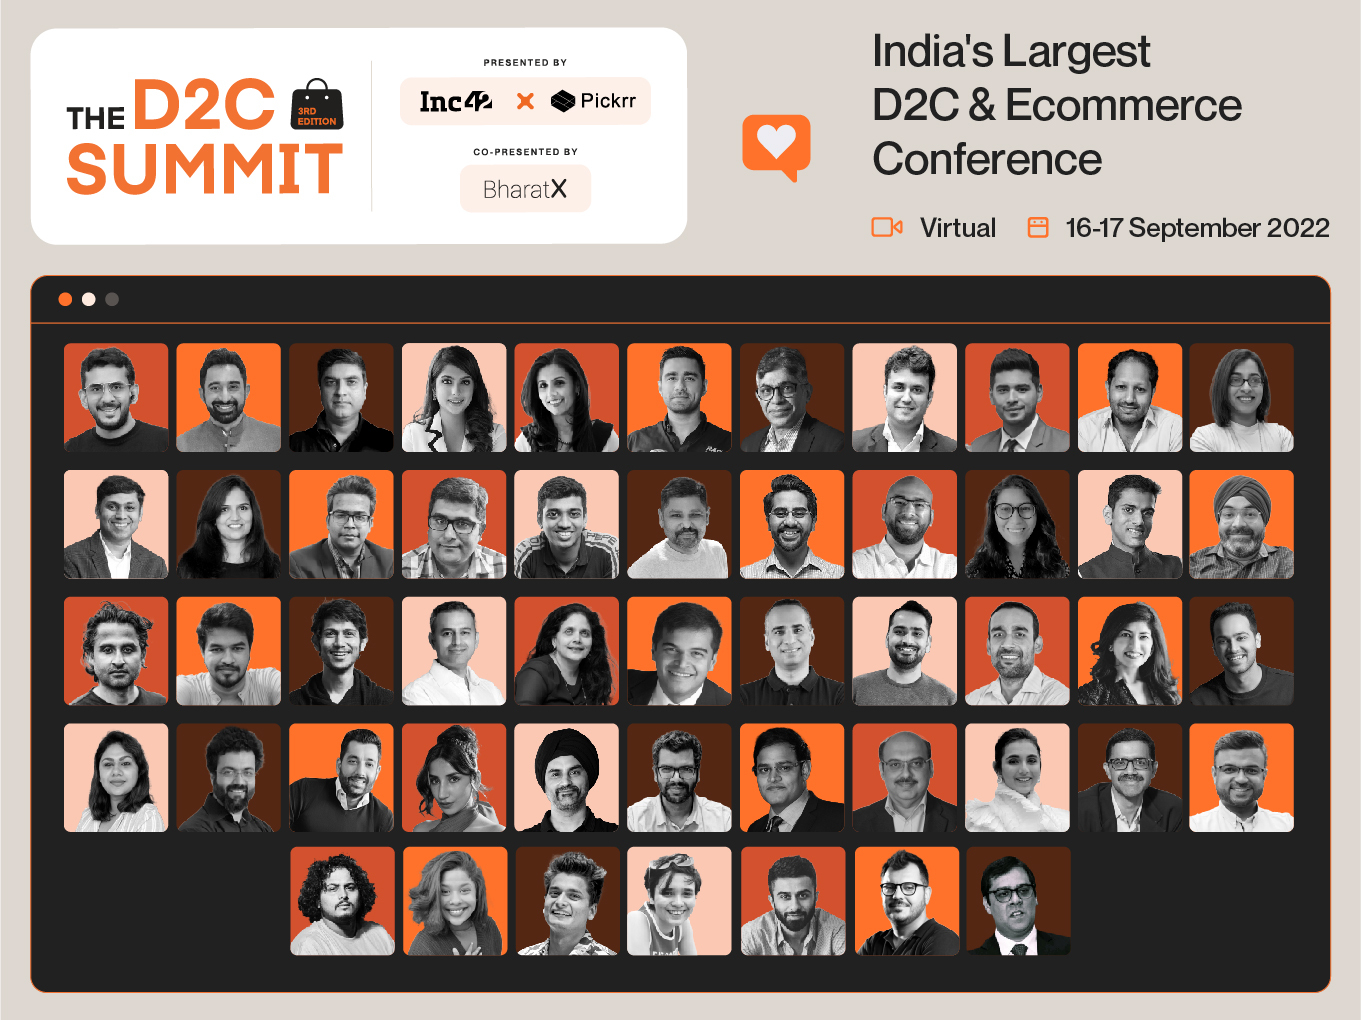 What To Expect At The D2C Summit 3.0: Unveiling The Agenda For India’s Largest D2C & Ecommerce Conference